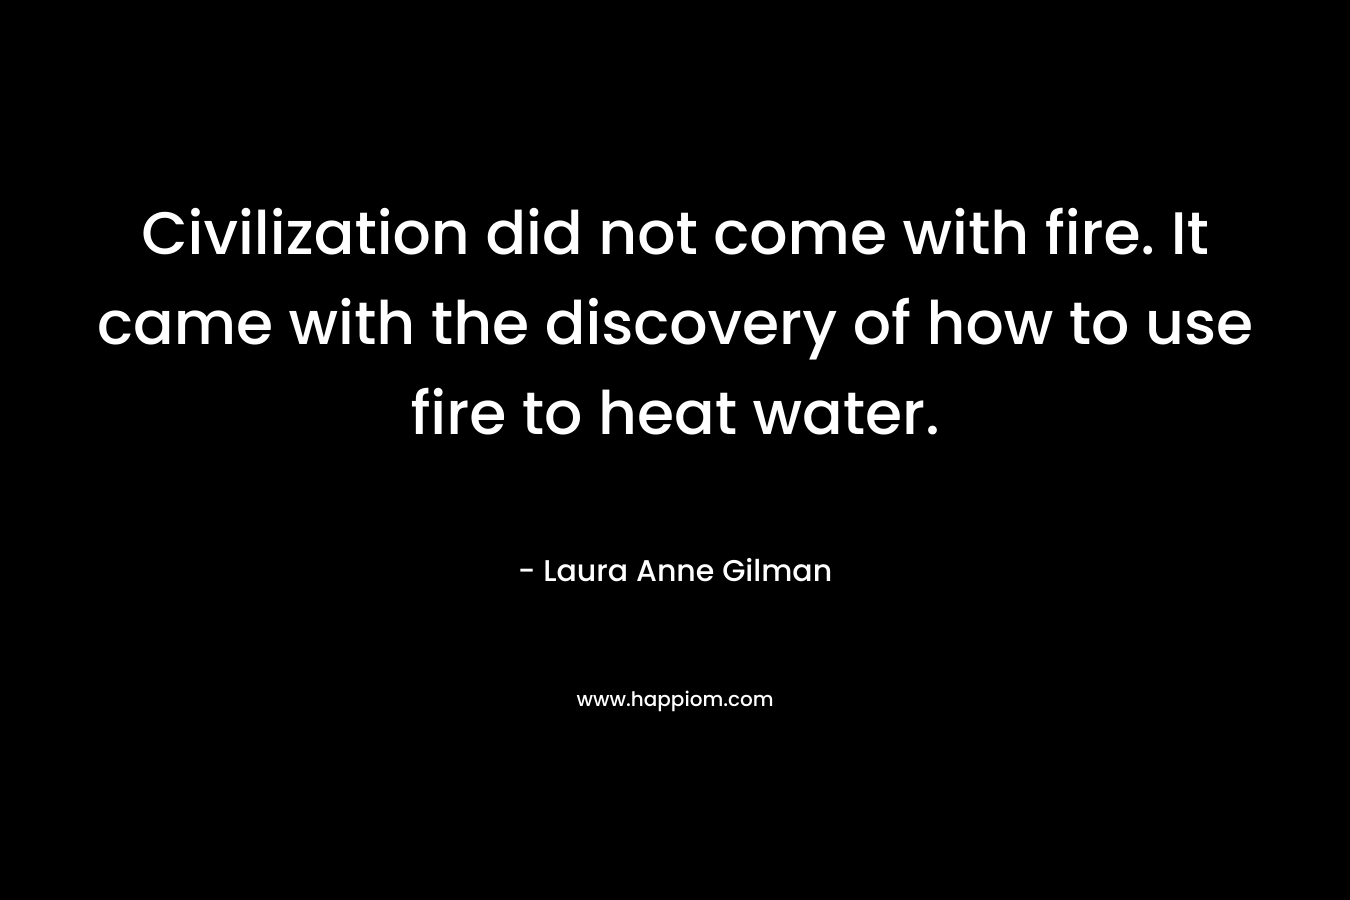 Civilization did not come with fire. It came with the discovery of how to use fire to heat water.